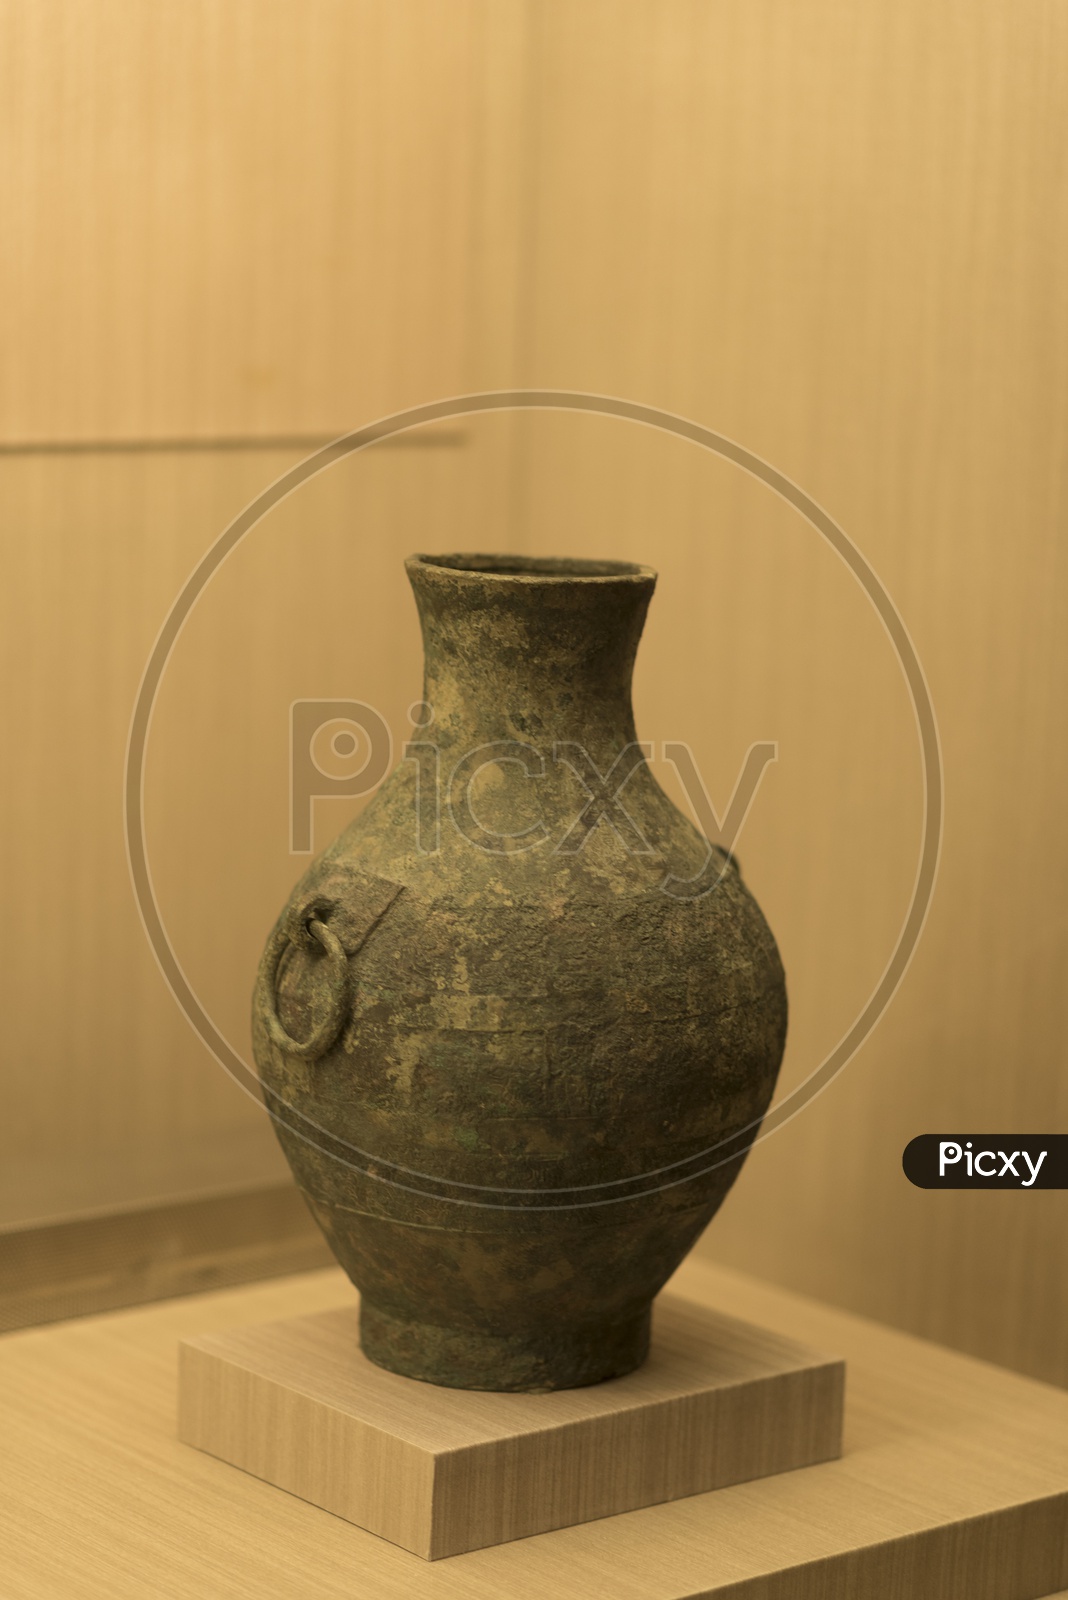 Antique Vessels In display  at  Taipei's National Palace Museum